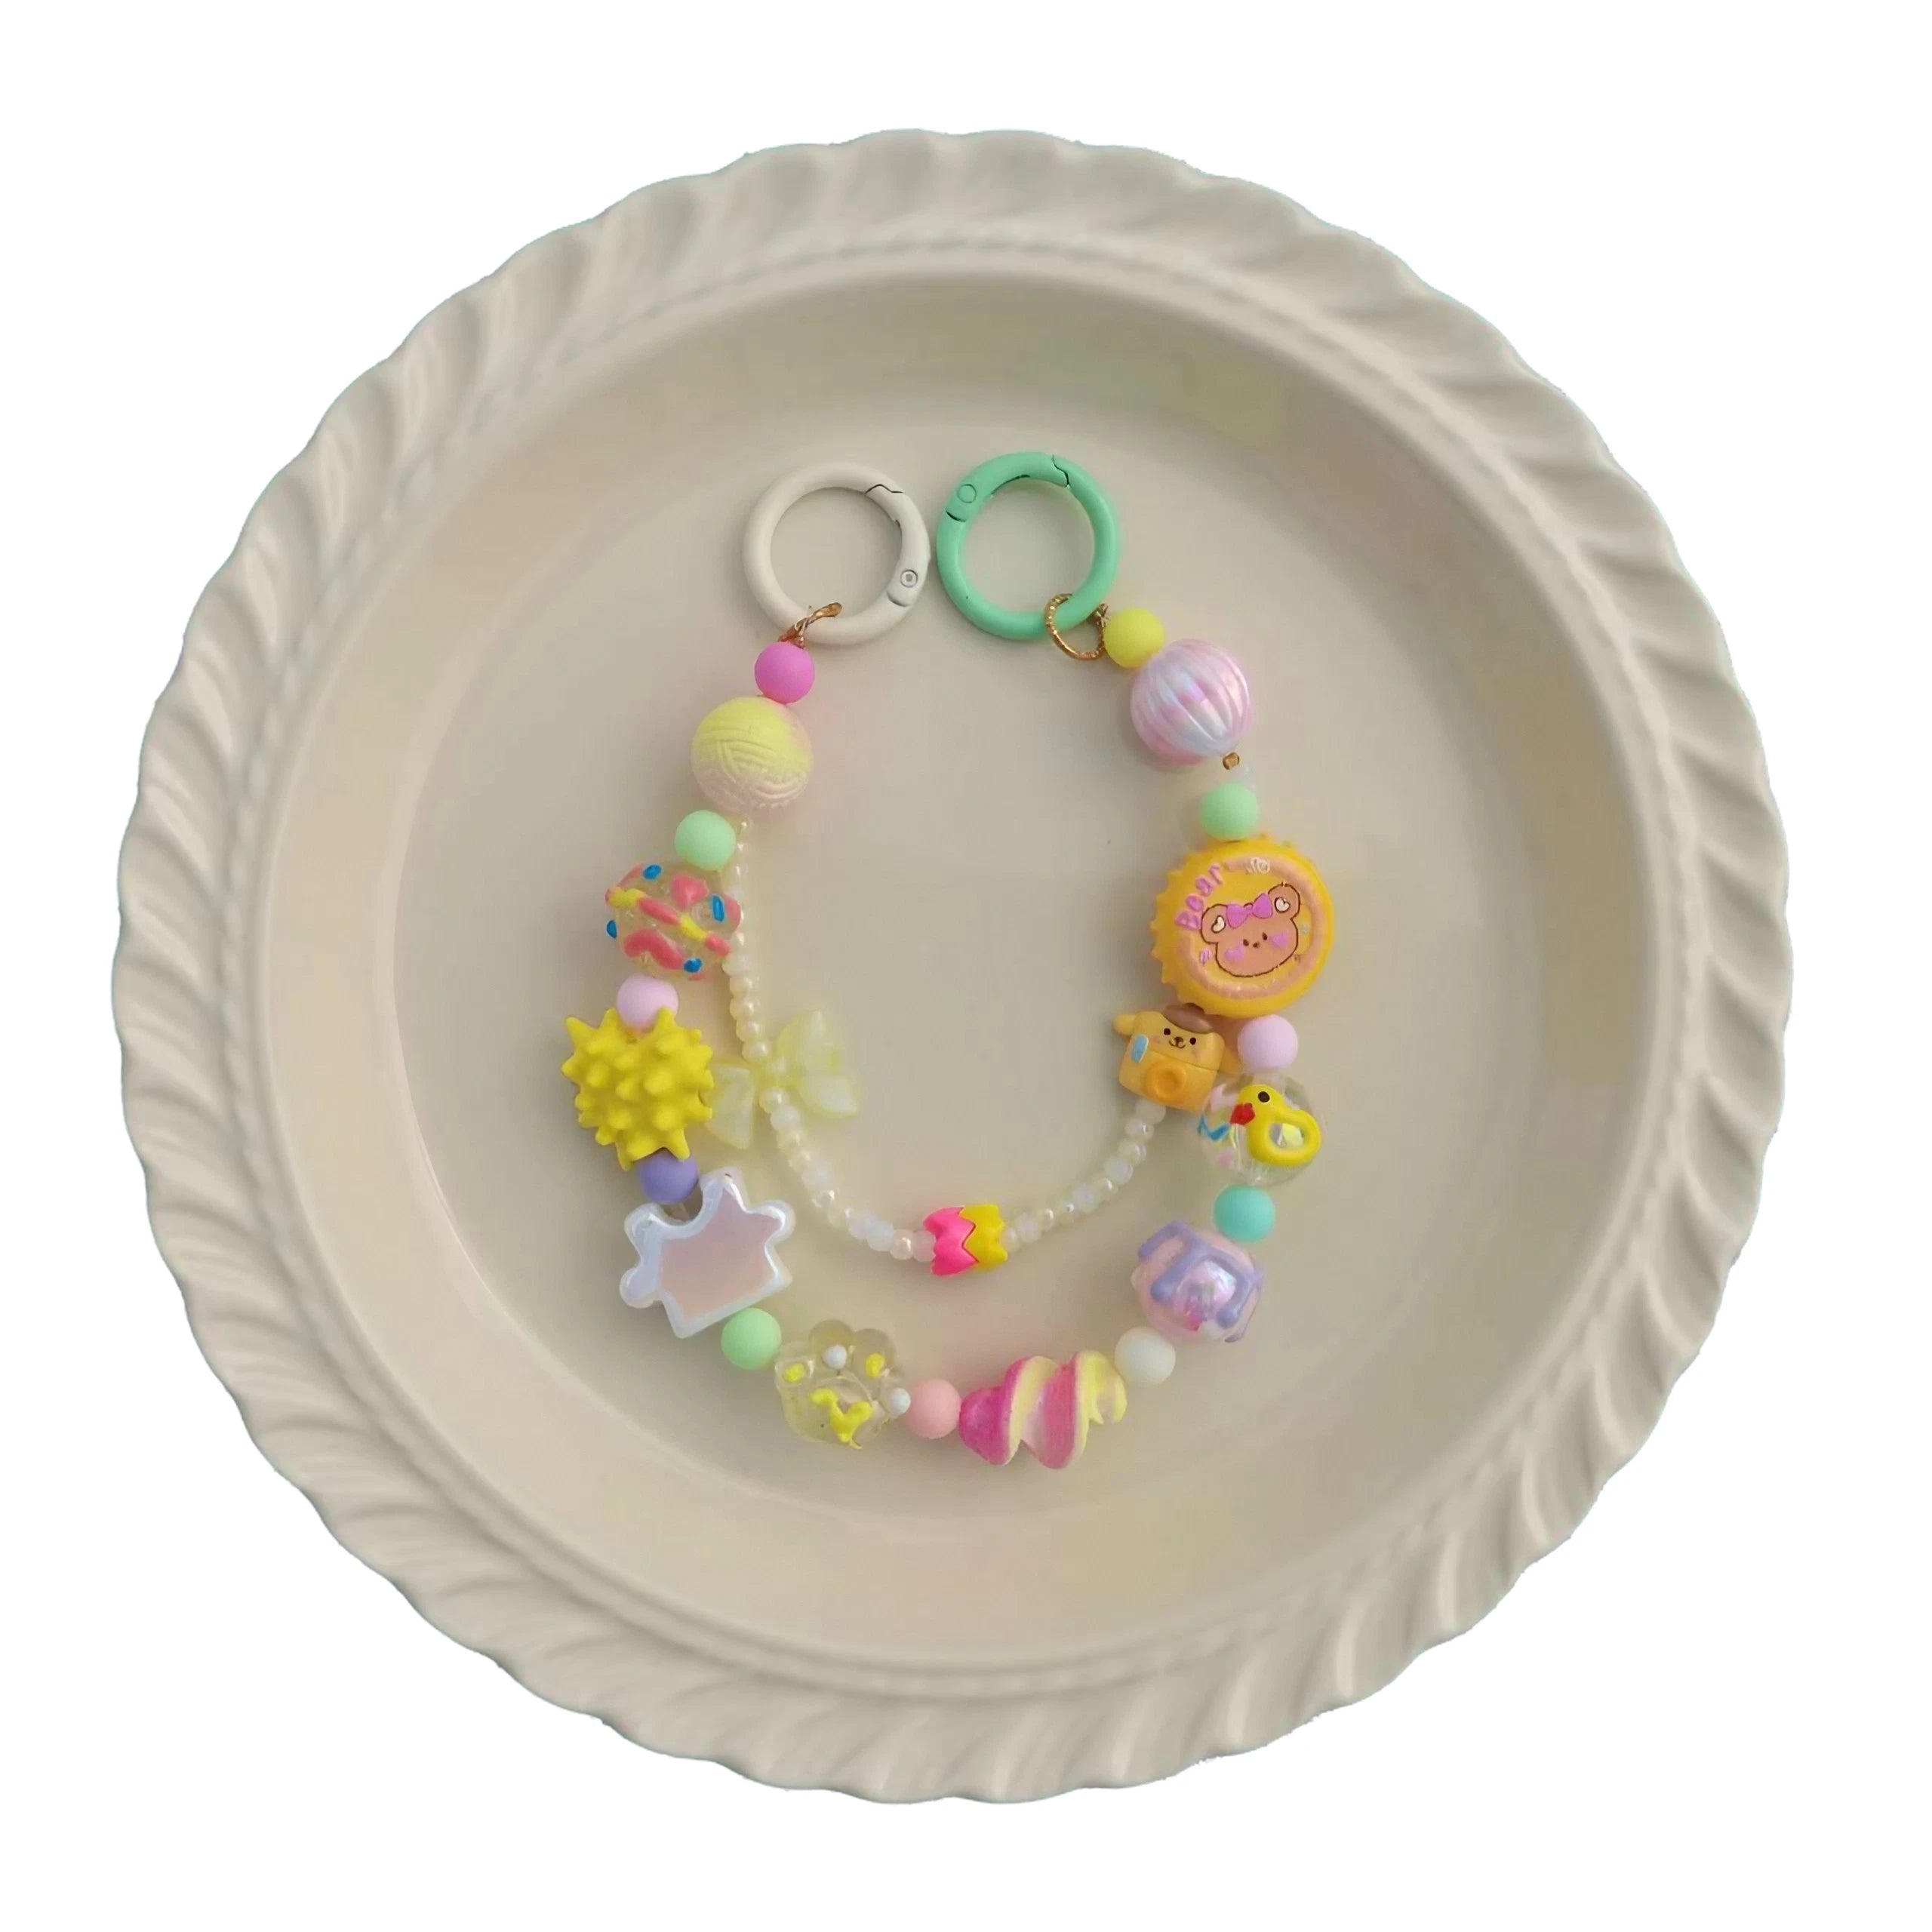 A pastel-colored handbag chain with plastic beads arranged on a white plate